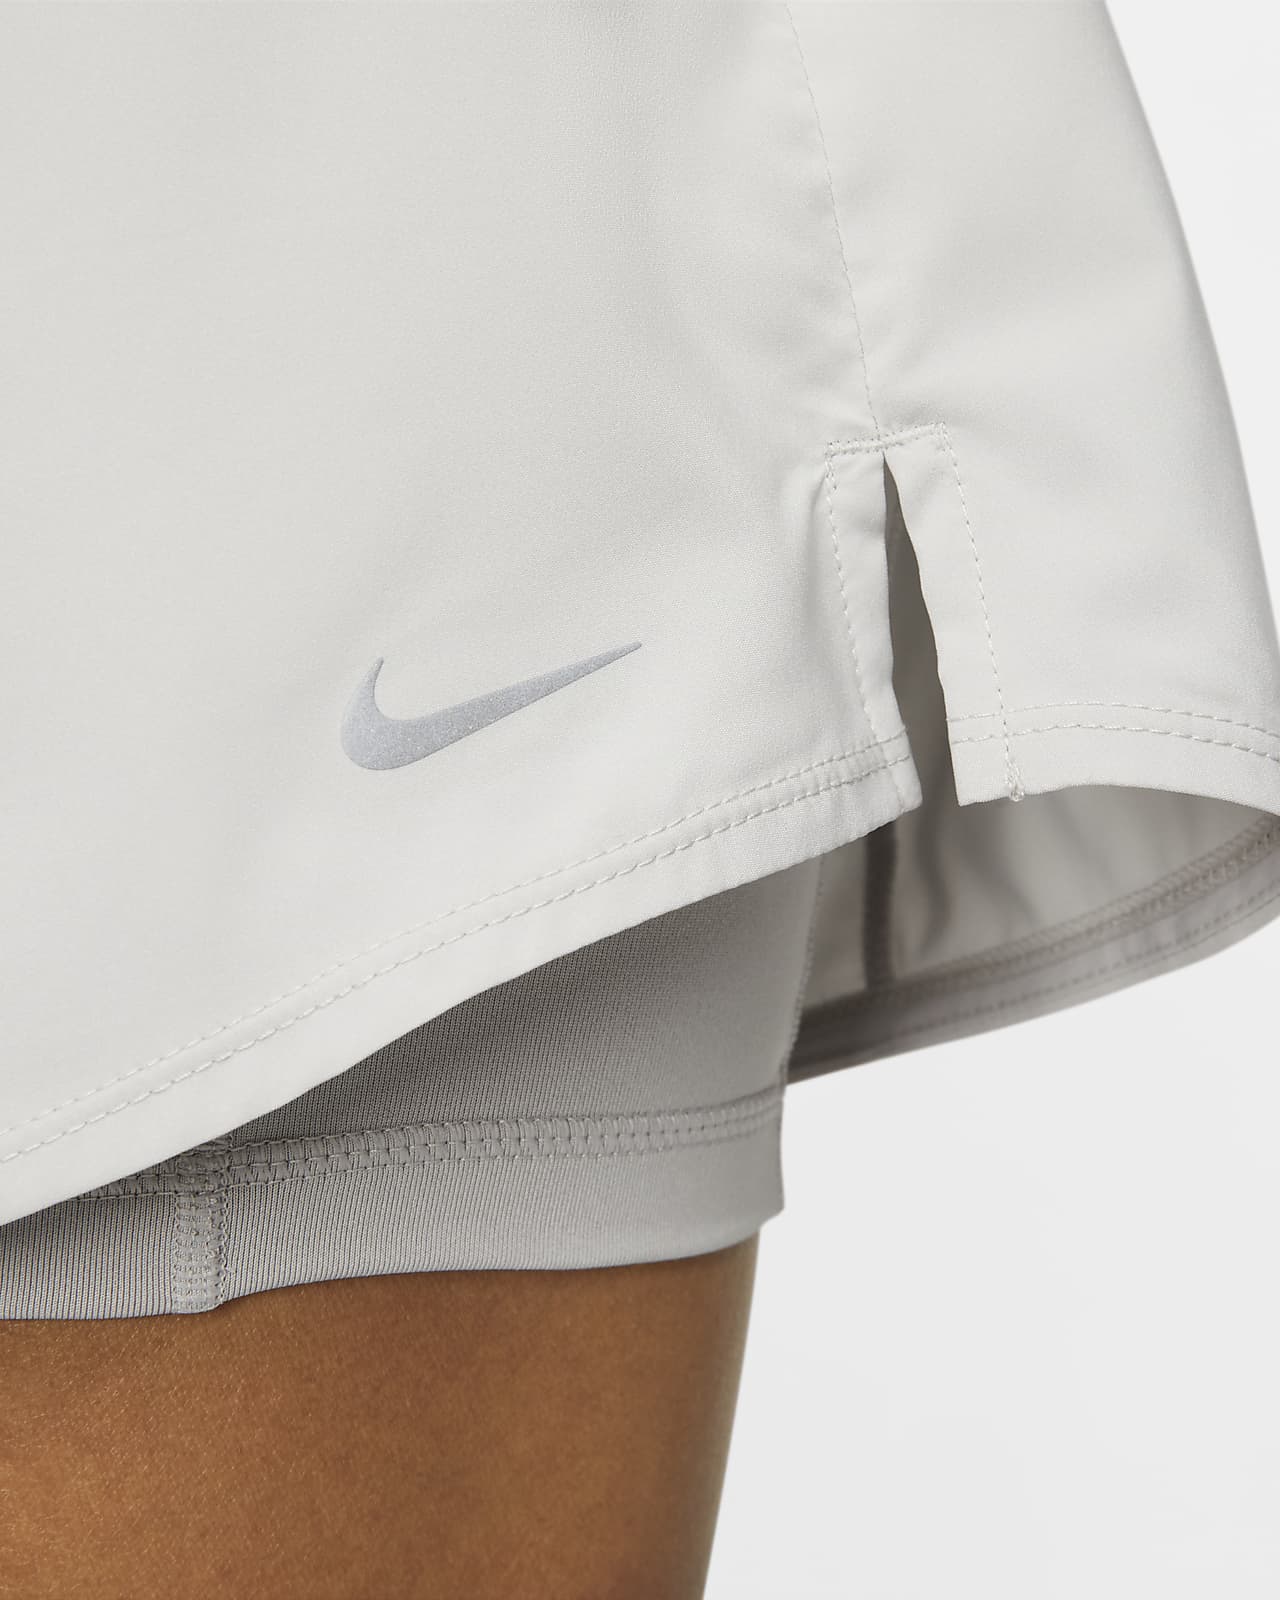 Nike Dri-Fit Women's Shorts With Built-in Underwear Size Large